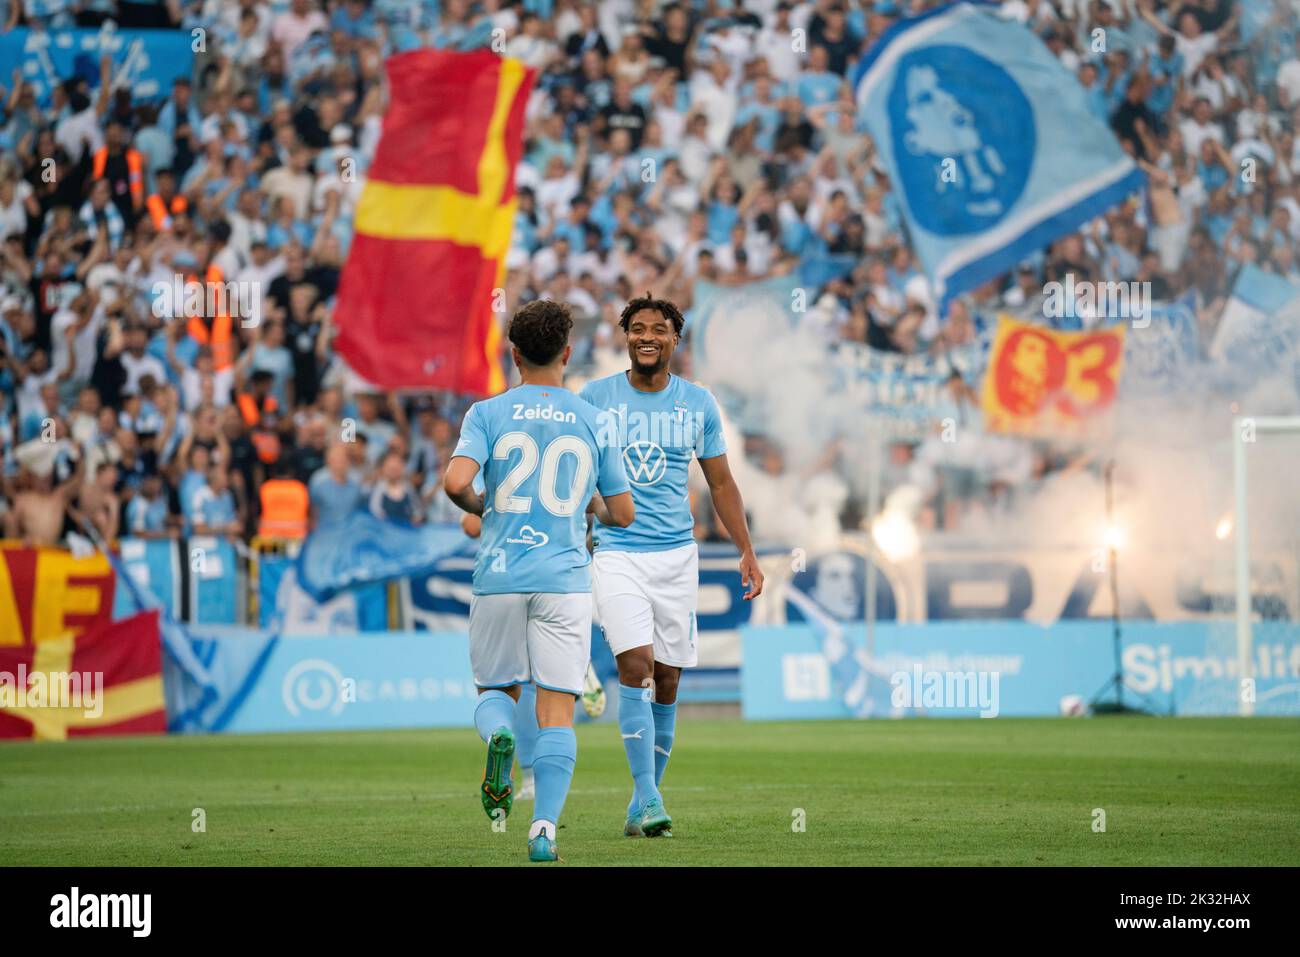 Malmoe, Sweden. 18th, August 2022. Moustafa Zeidan (20) of Malmö FF scores for 1-0 and celebrates with Joseph Ceesay (15) during the UEFA Europa League qualification match between Malmö FF and Sivasspor at Eleda Stadion in Malmö. (Photo credit: Gonzales Photo - Joe Miller). Stock Photo